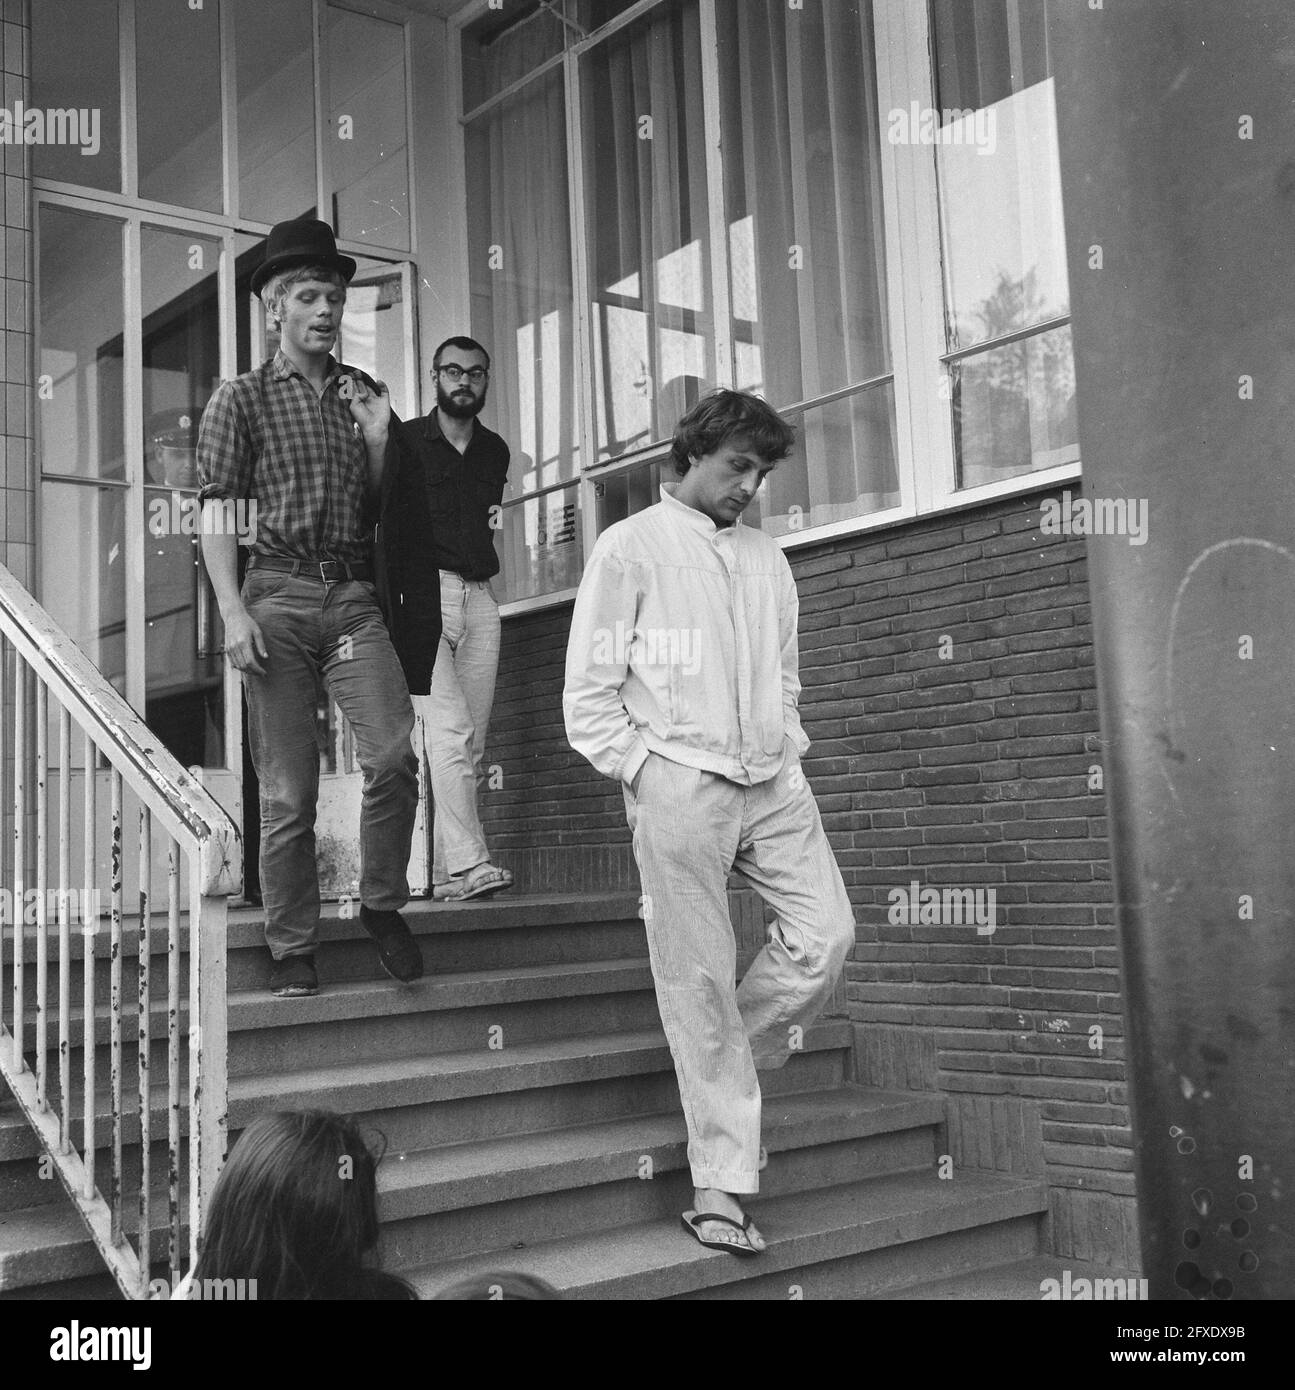 Stolk, Van Duyn and Grootveld leave the police station, August 14, 1965, activists, police, The Netherlands, 20th century press agency photo, news to remember, documentary, historic photography 1945-1990, visual stories, human history of the Twentieth Century, capturing moments in time Stock Photo